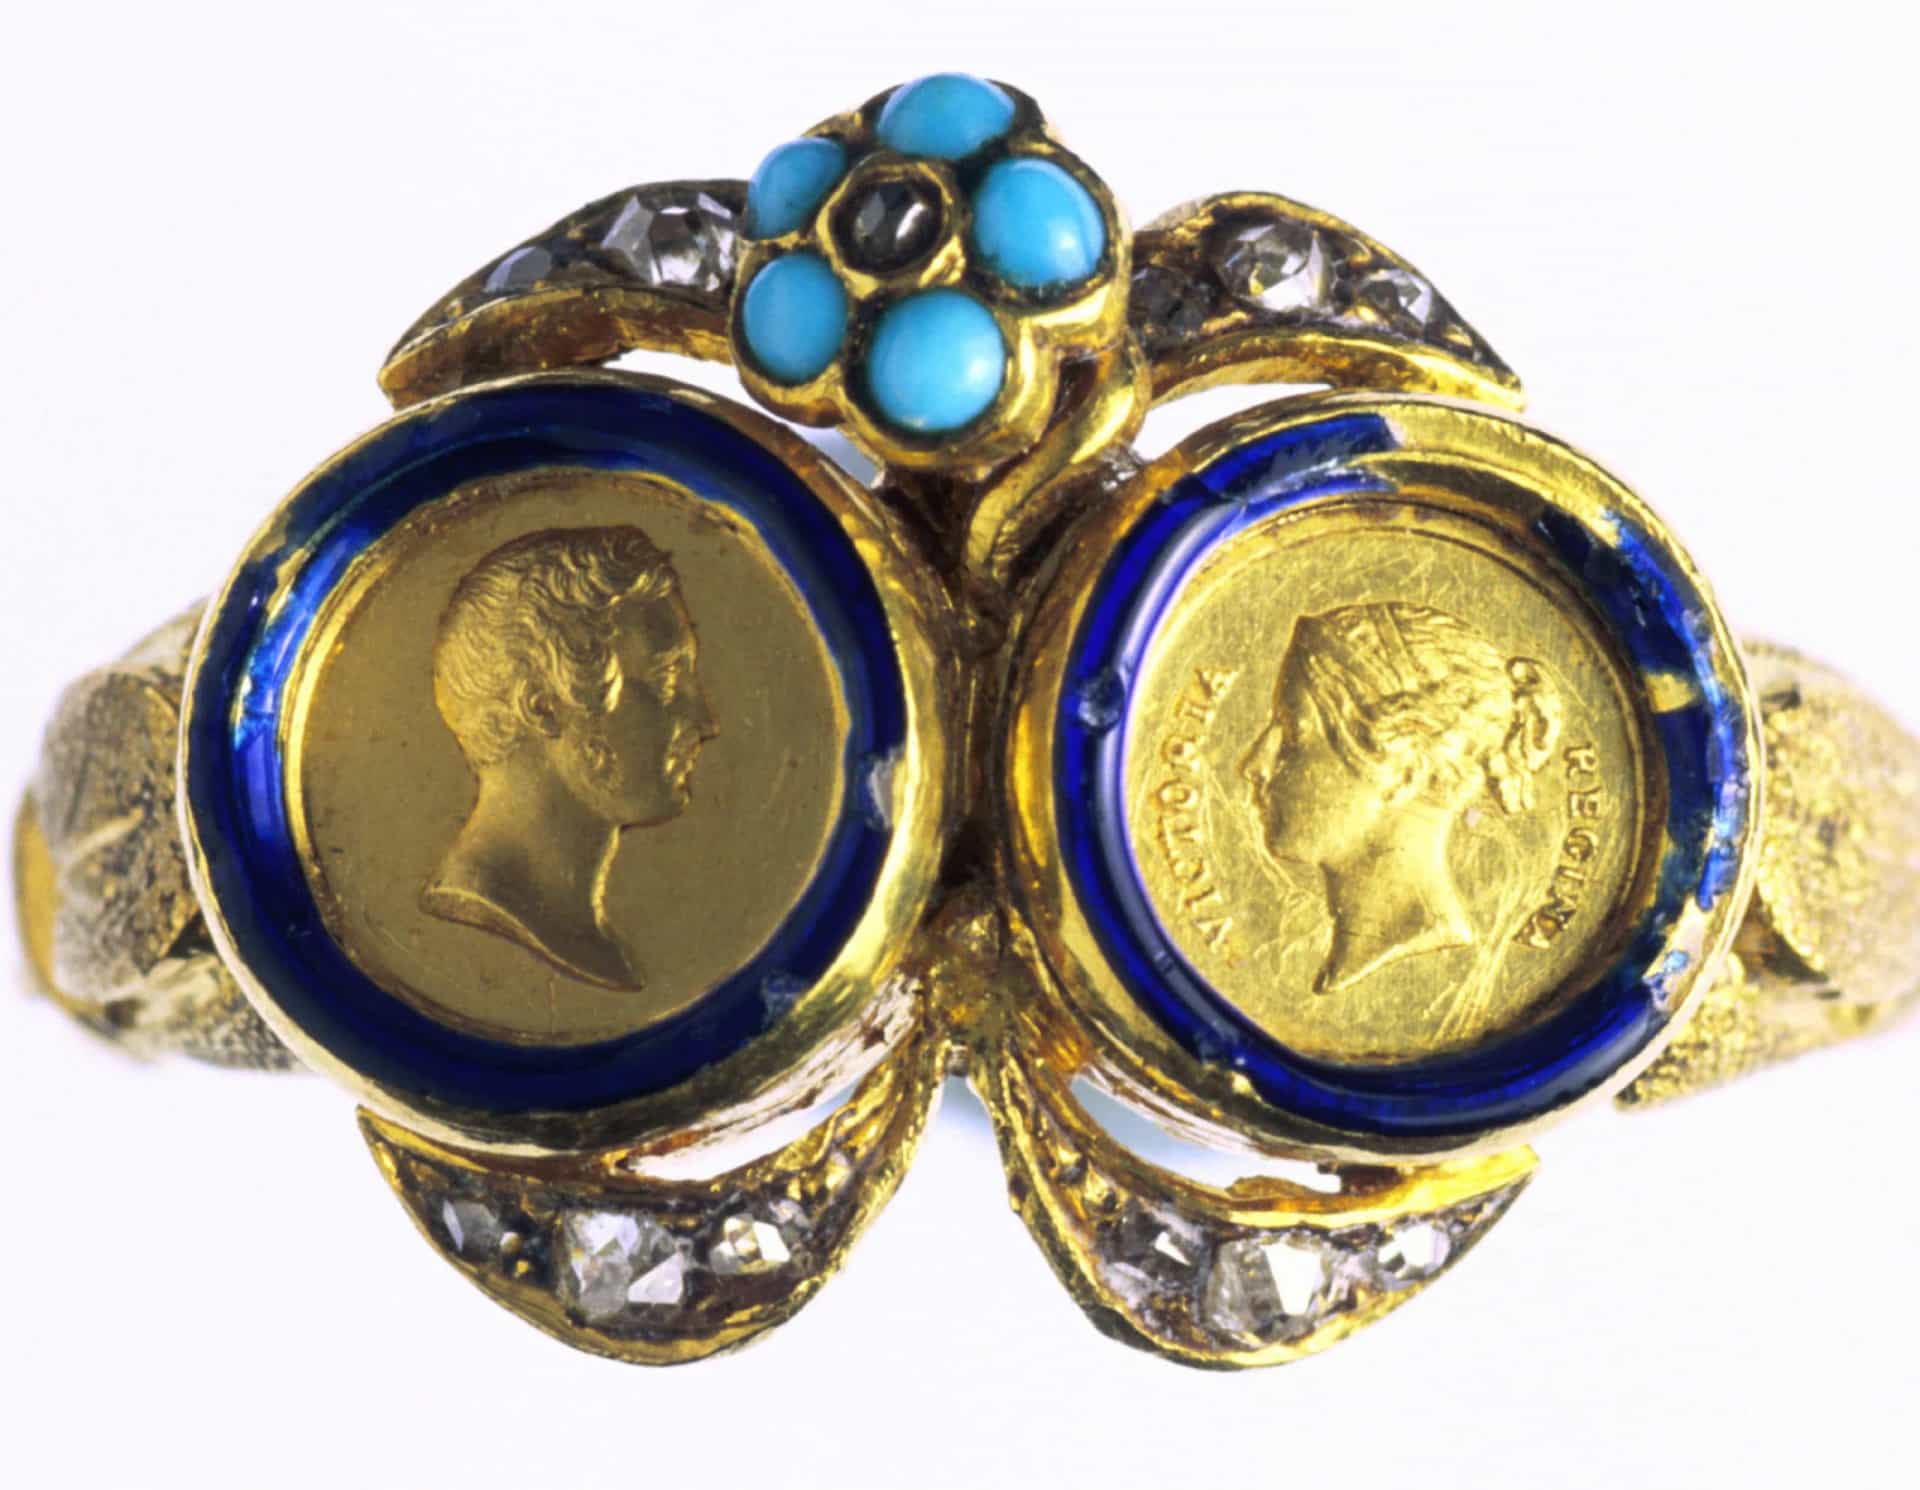 <p>A gold ring, with portraits of England's Queen Victoria and Prince Albert, from around 1840. The bezel is formed of miniature medals of Victoria and Albert. It was made by Rundell, Bridge and Rundell, who became the royal goldsmith in 1789.</p>